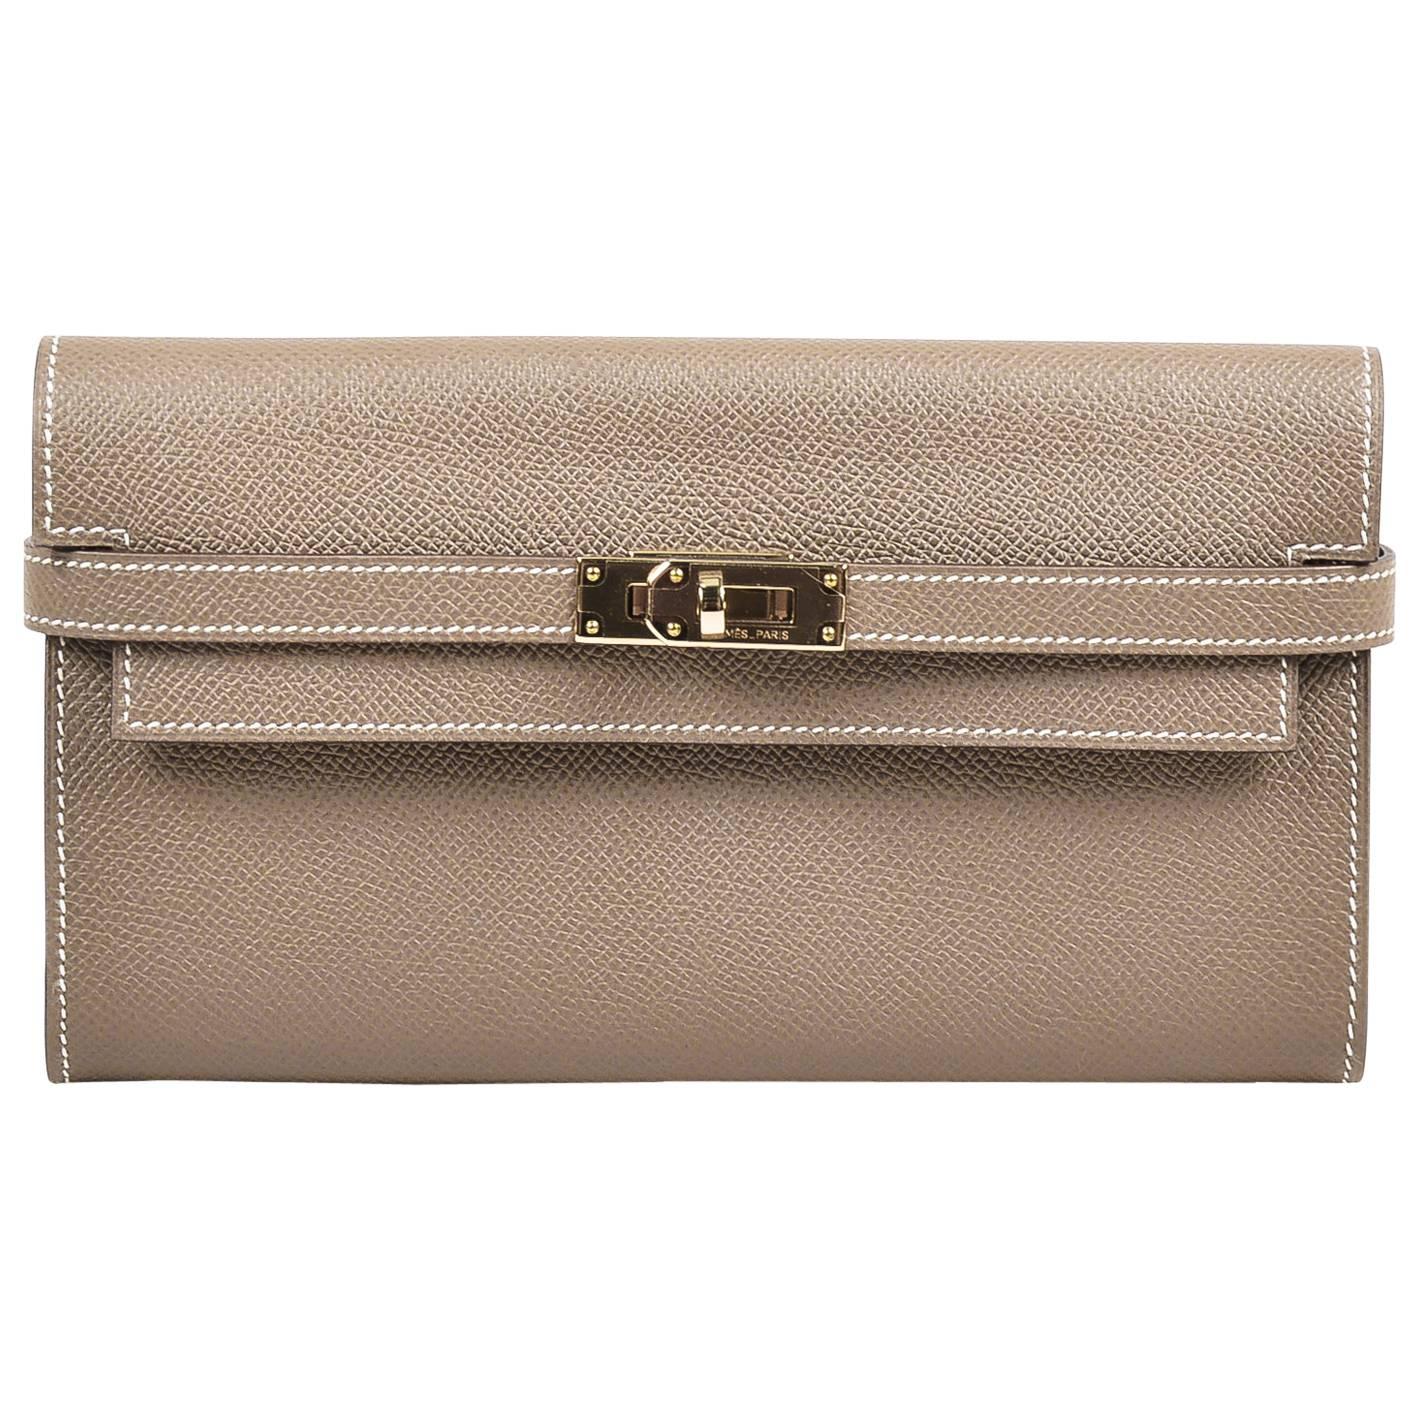 Hermes New in Box Etoupe Taupe Epsom Leather "Kelly Long" Wallet For Sale